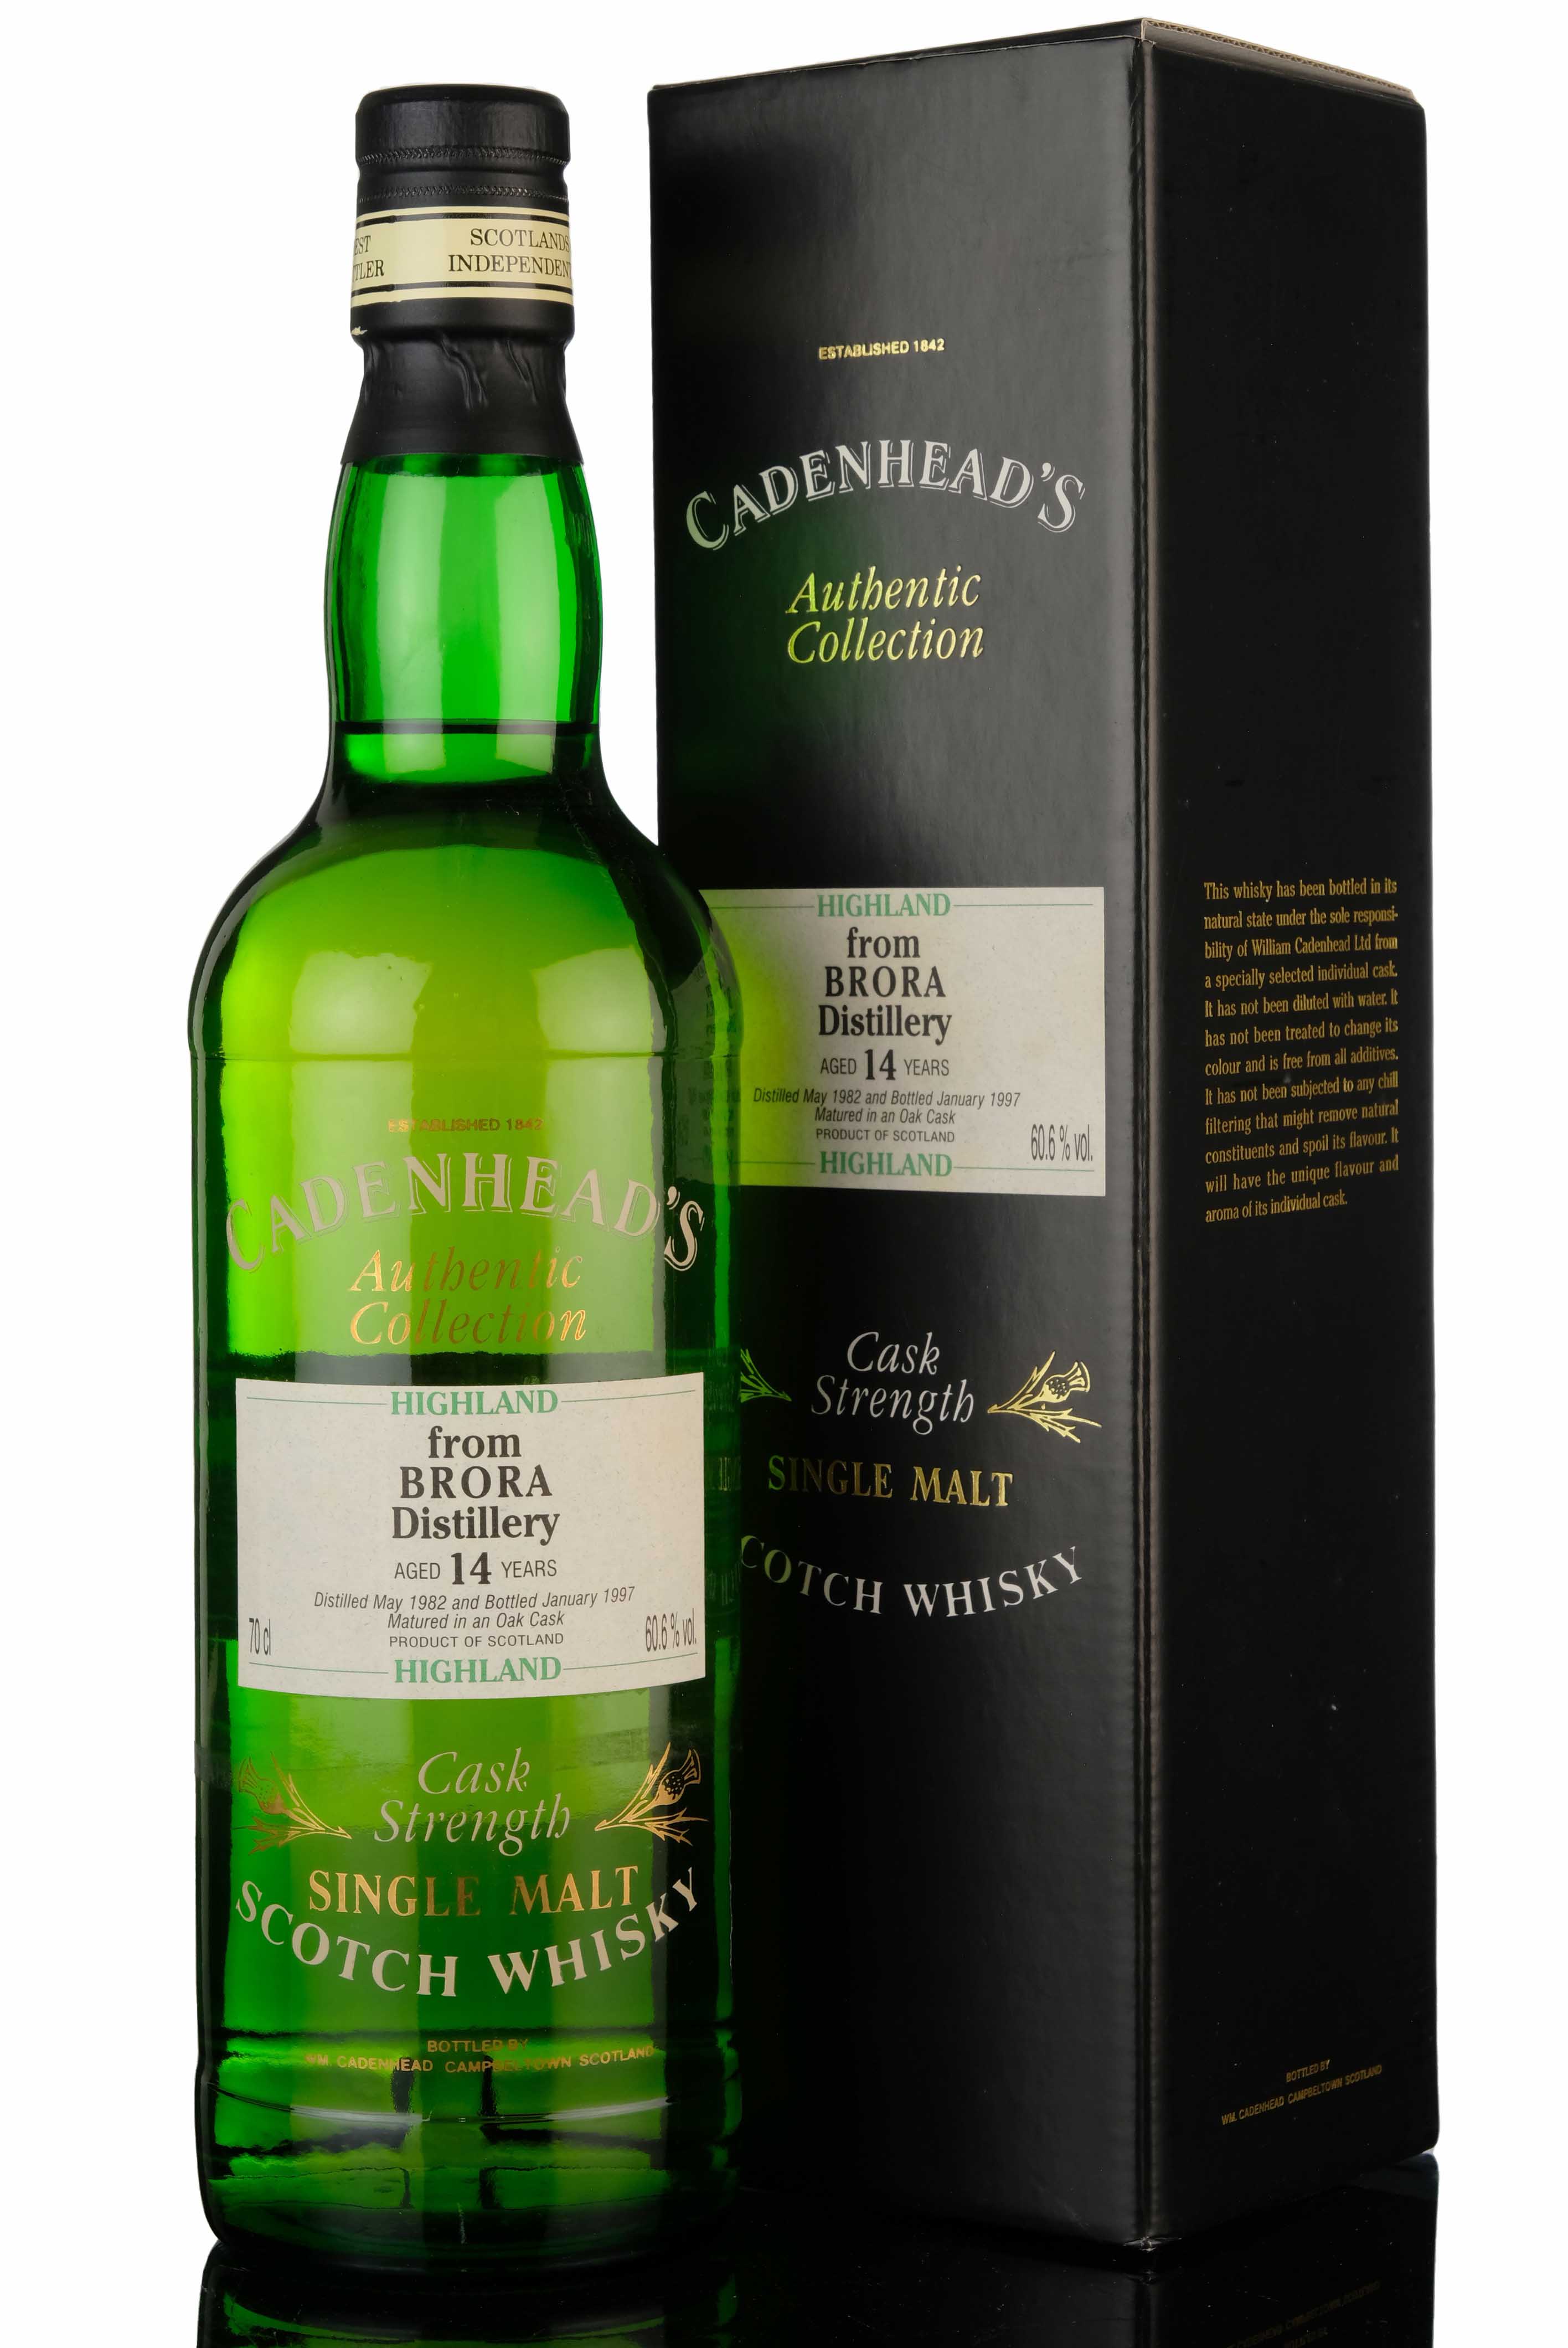 Brora 1982-1997 - 14 Year Old - Cadenheads Authentic Collection